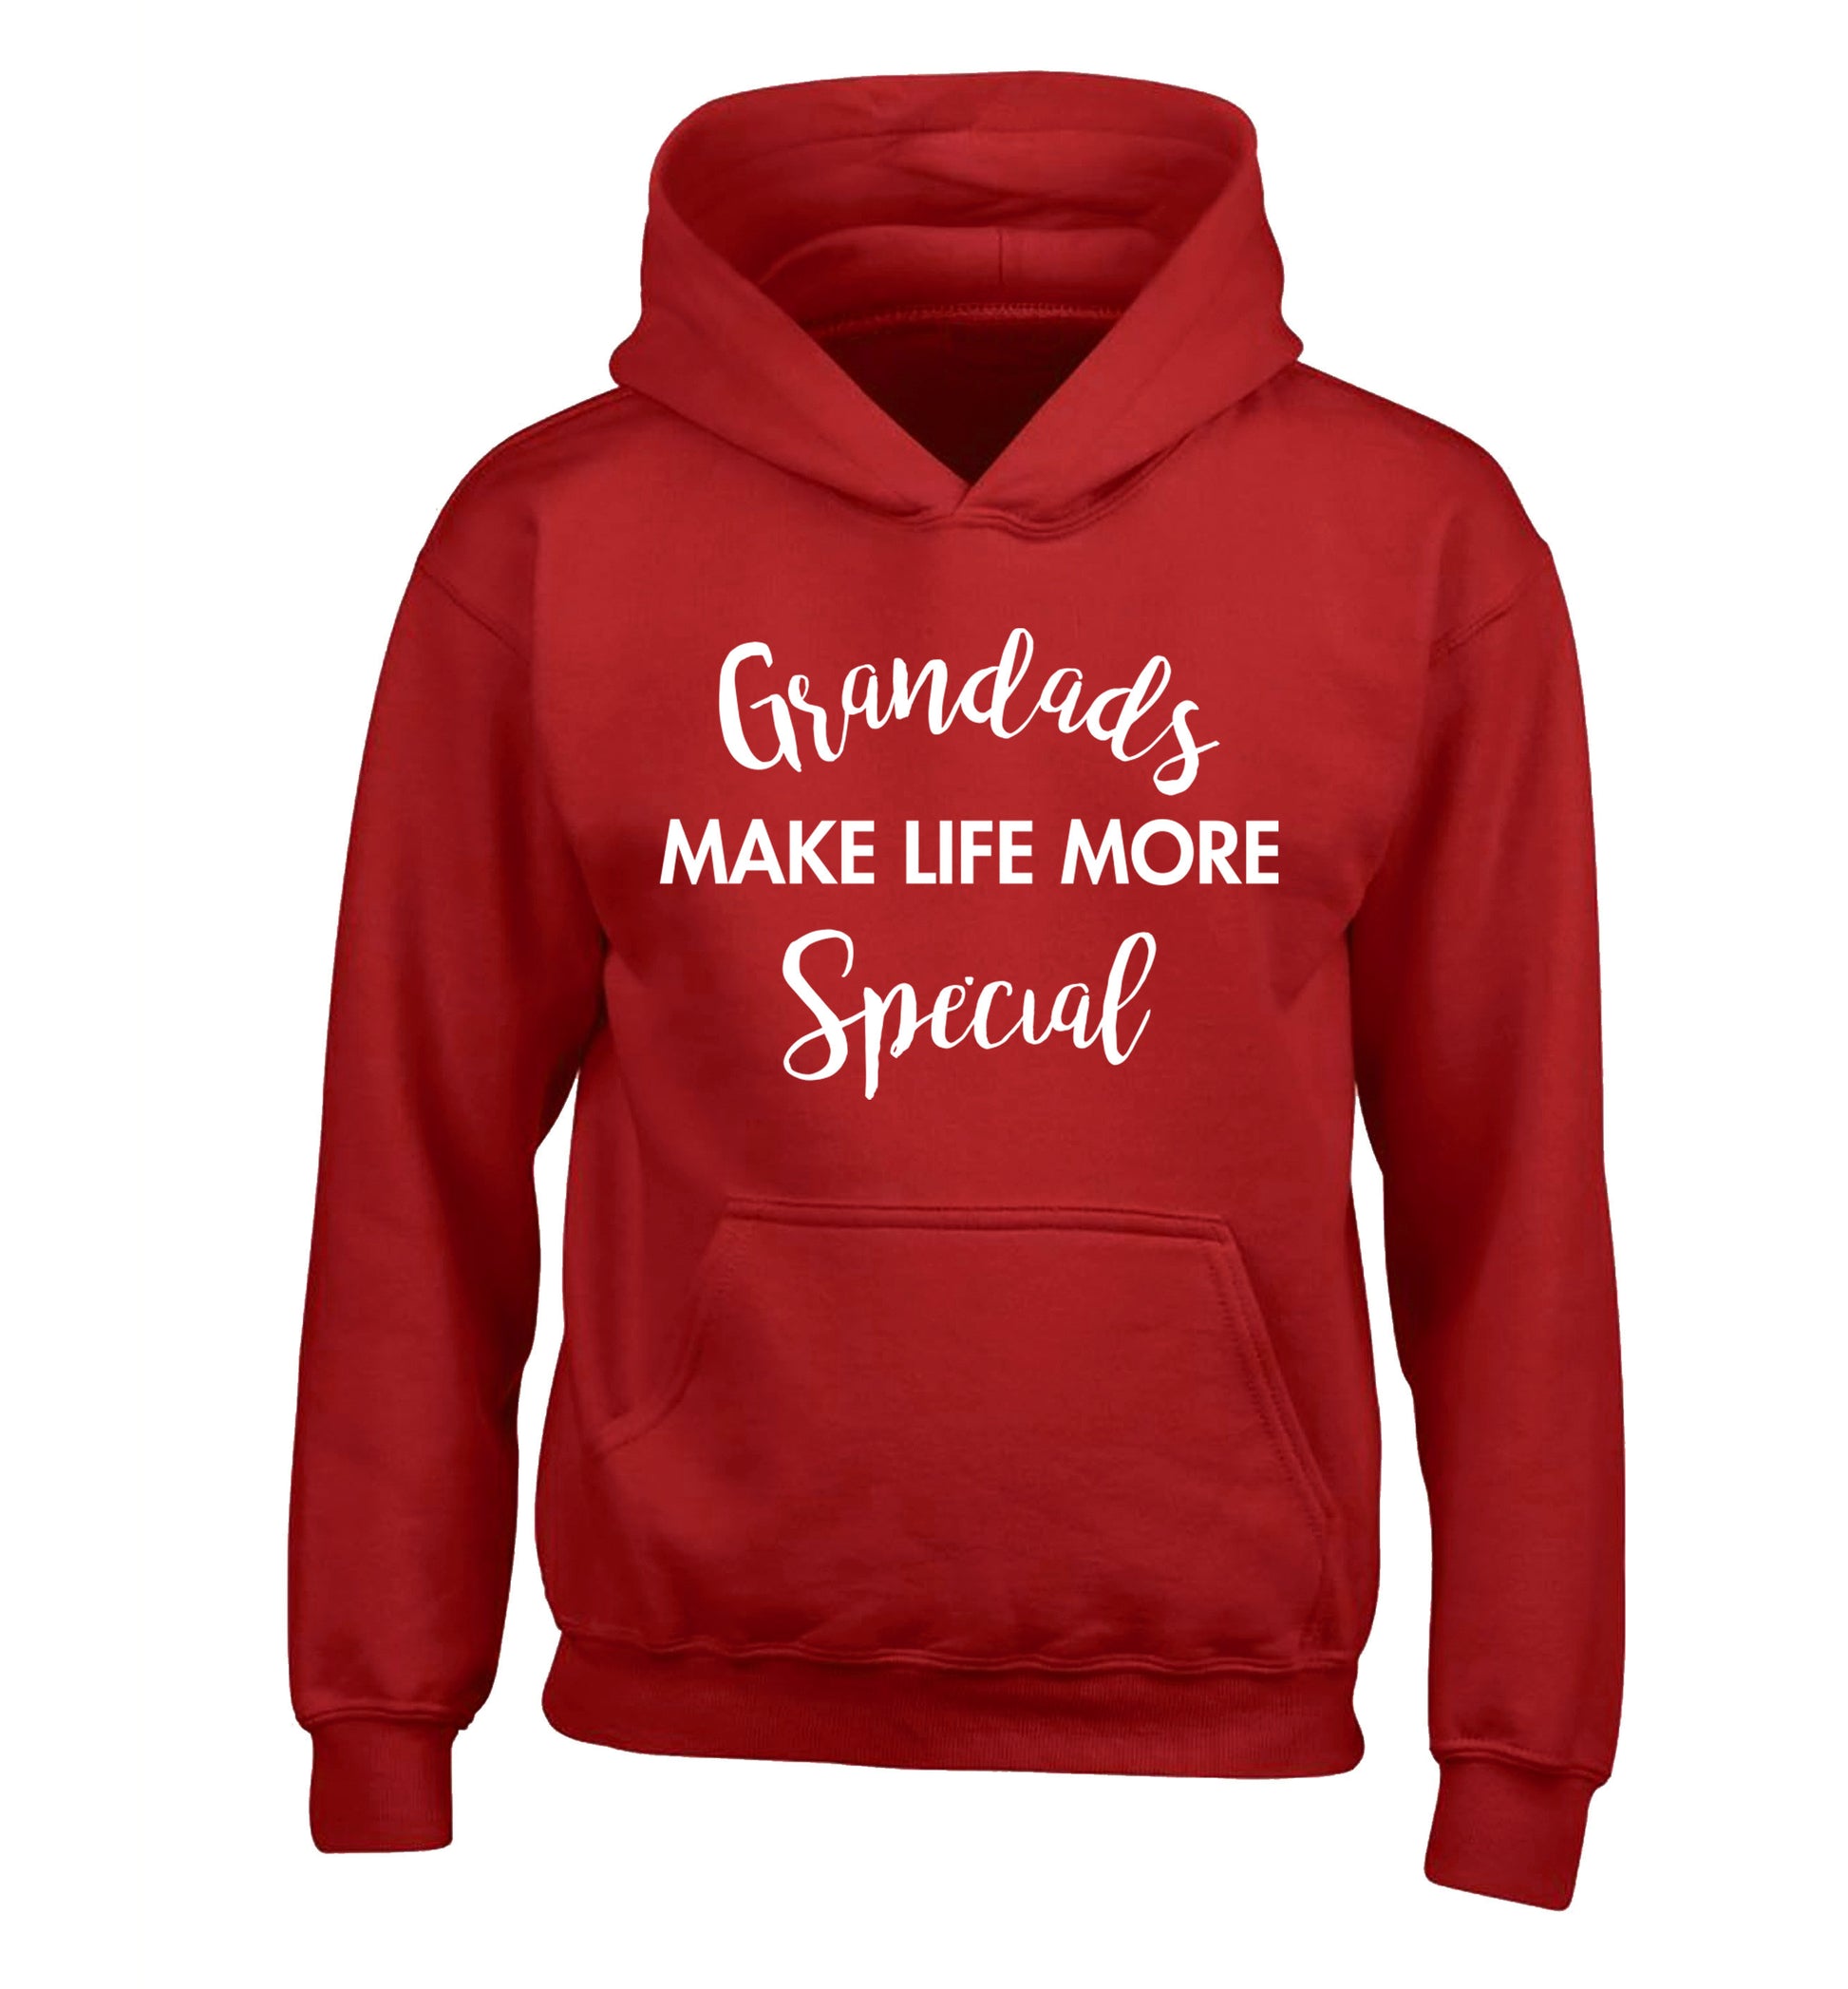 Grandads make life more special children's red hoodie 12-14 Years